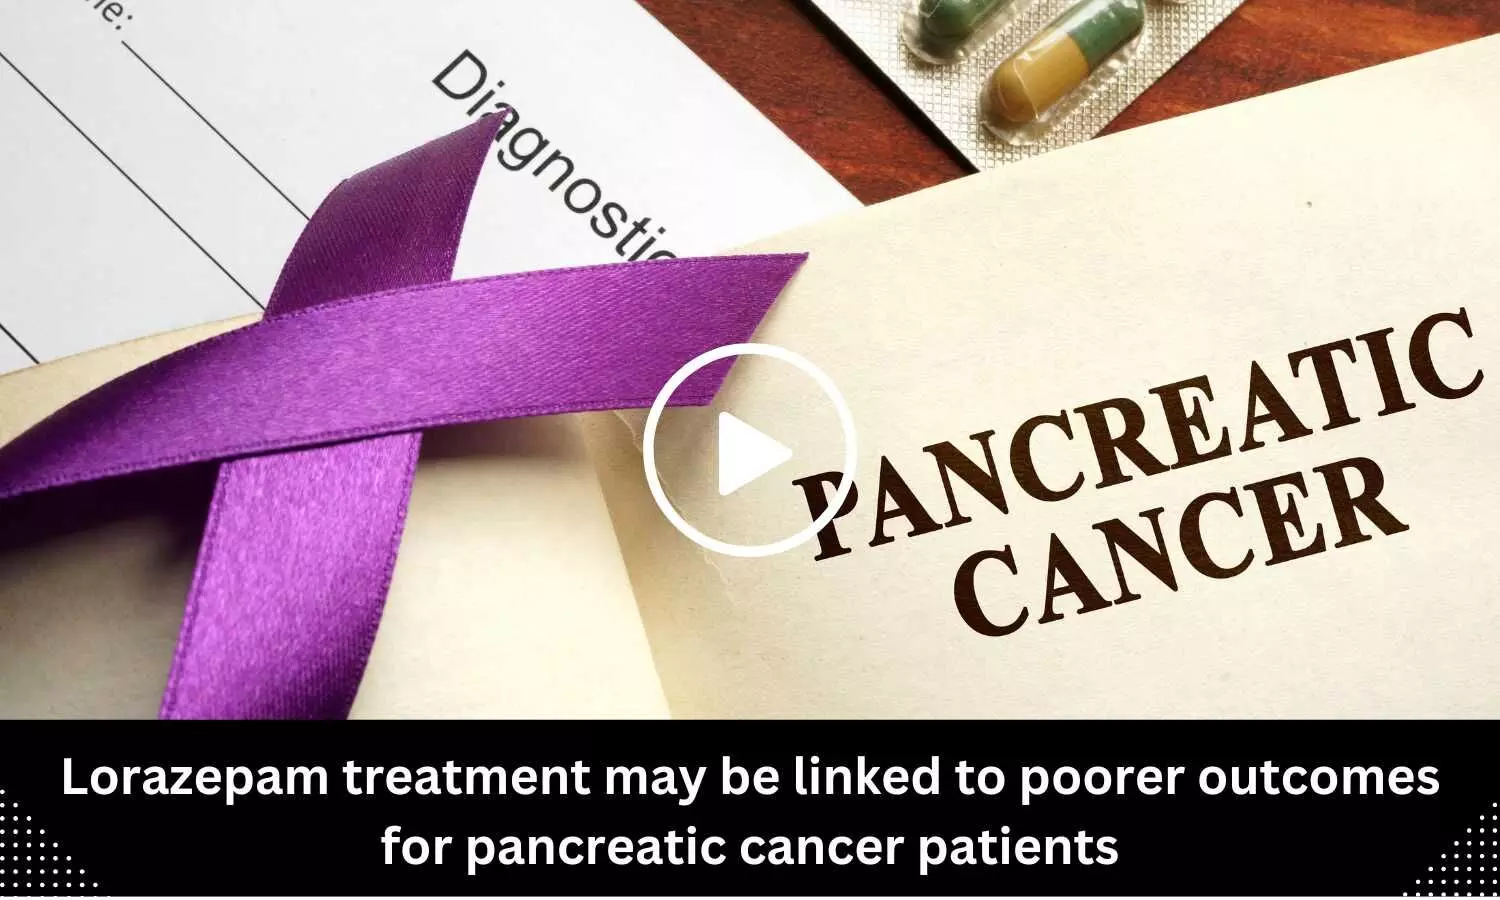 Lorazepam treatment may be linked to poorer outcomes for pancreatic cancer patients